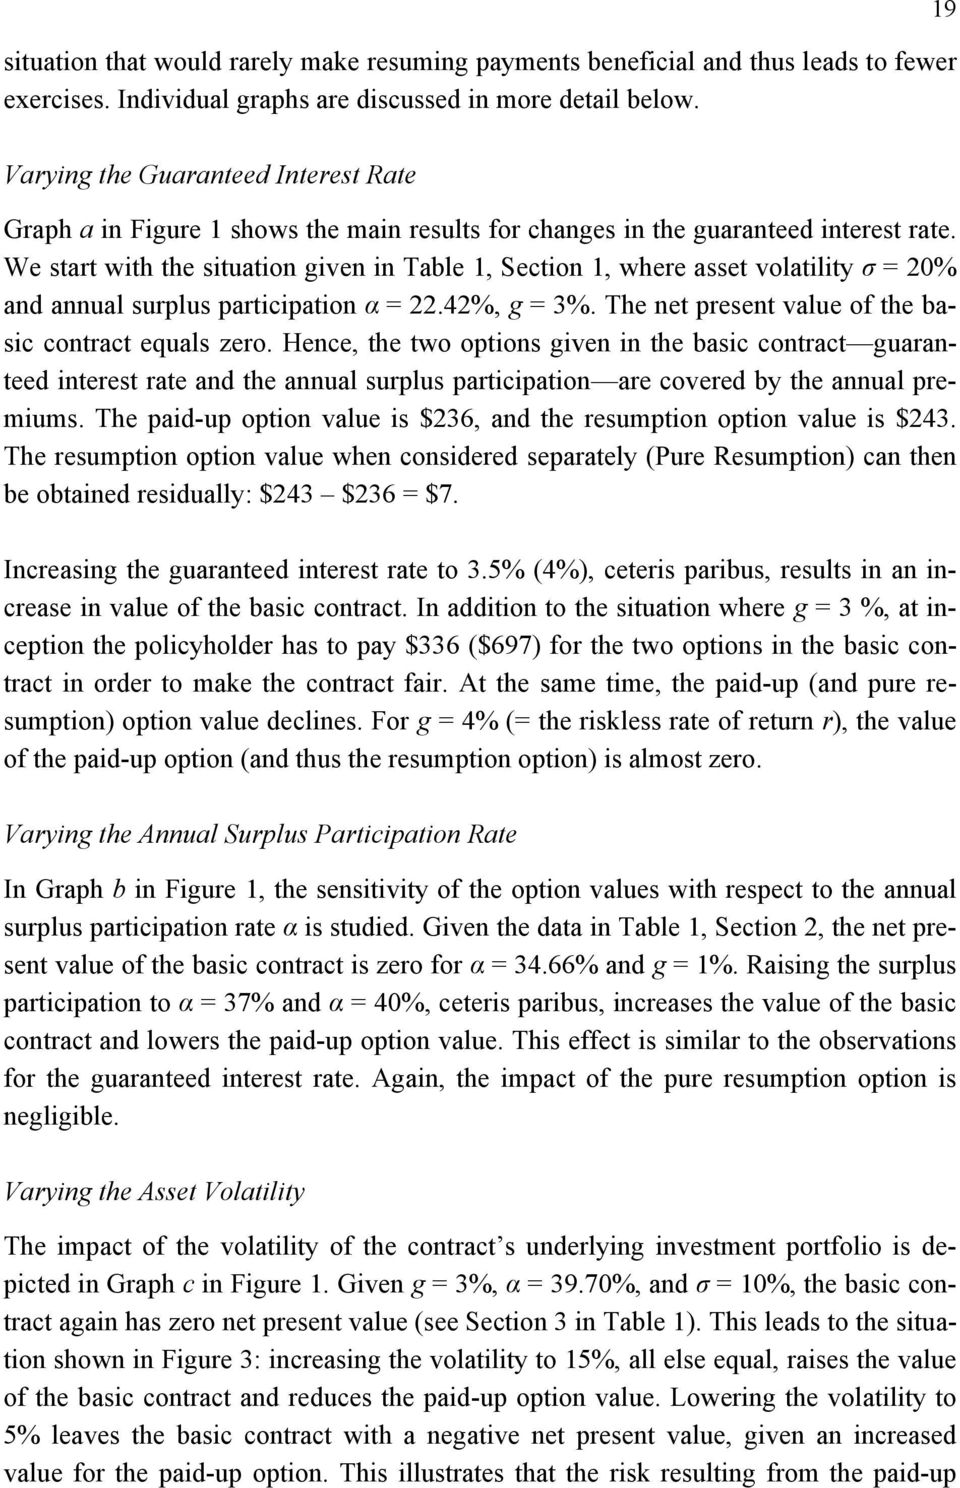 We start with the situation given in Table 1, Section 1, where asset volatility σ = 20% and annual surplus participation α = 22.42%, g = 3%. The net present value of the basic contract equals zero.